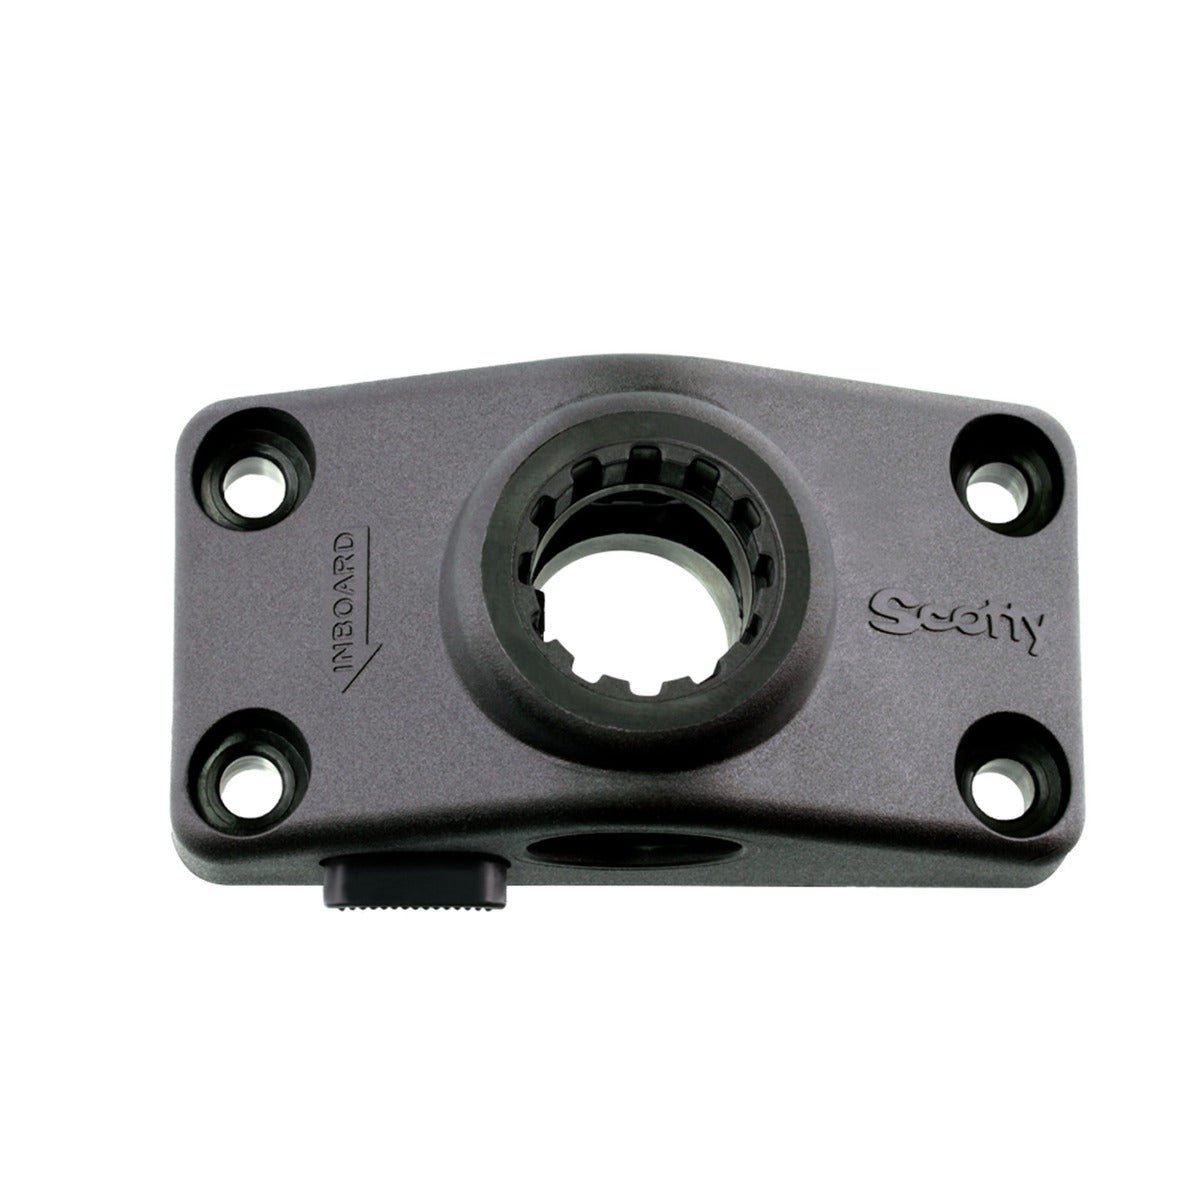 Scotty 241L Locking Combination Side or Deck Mount